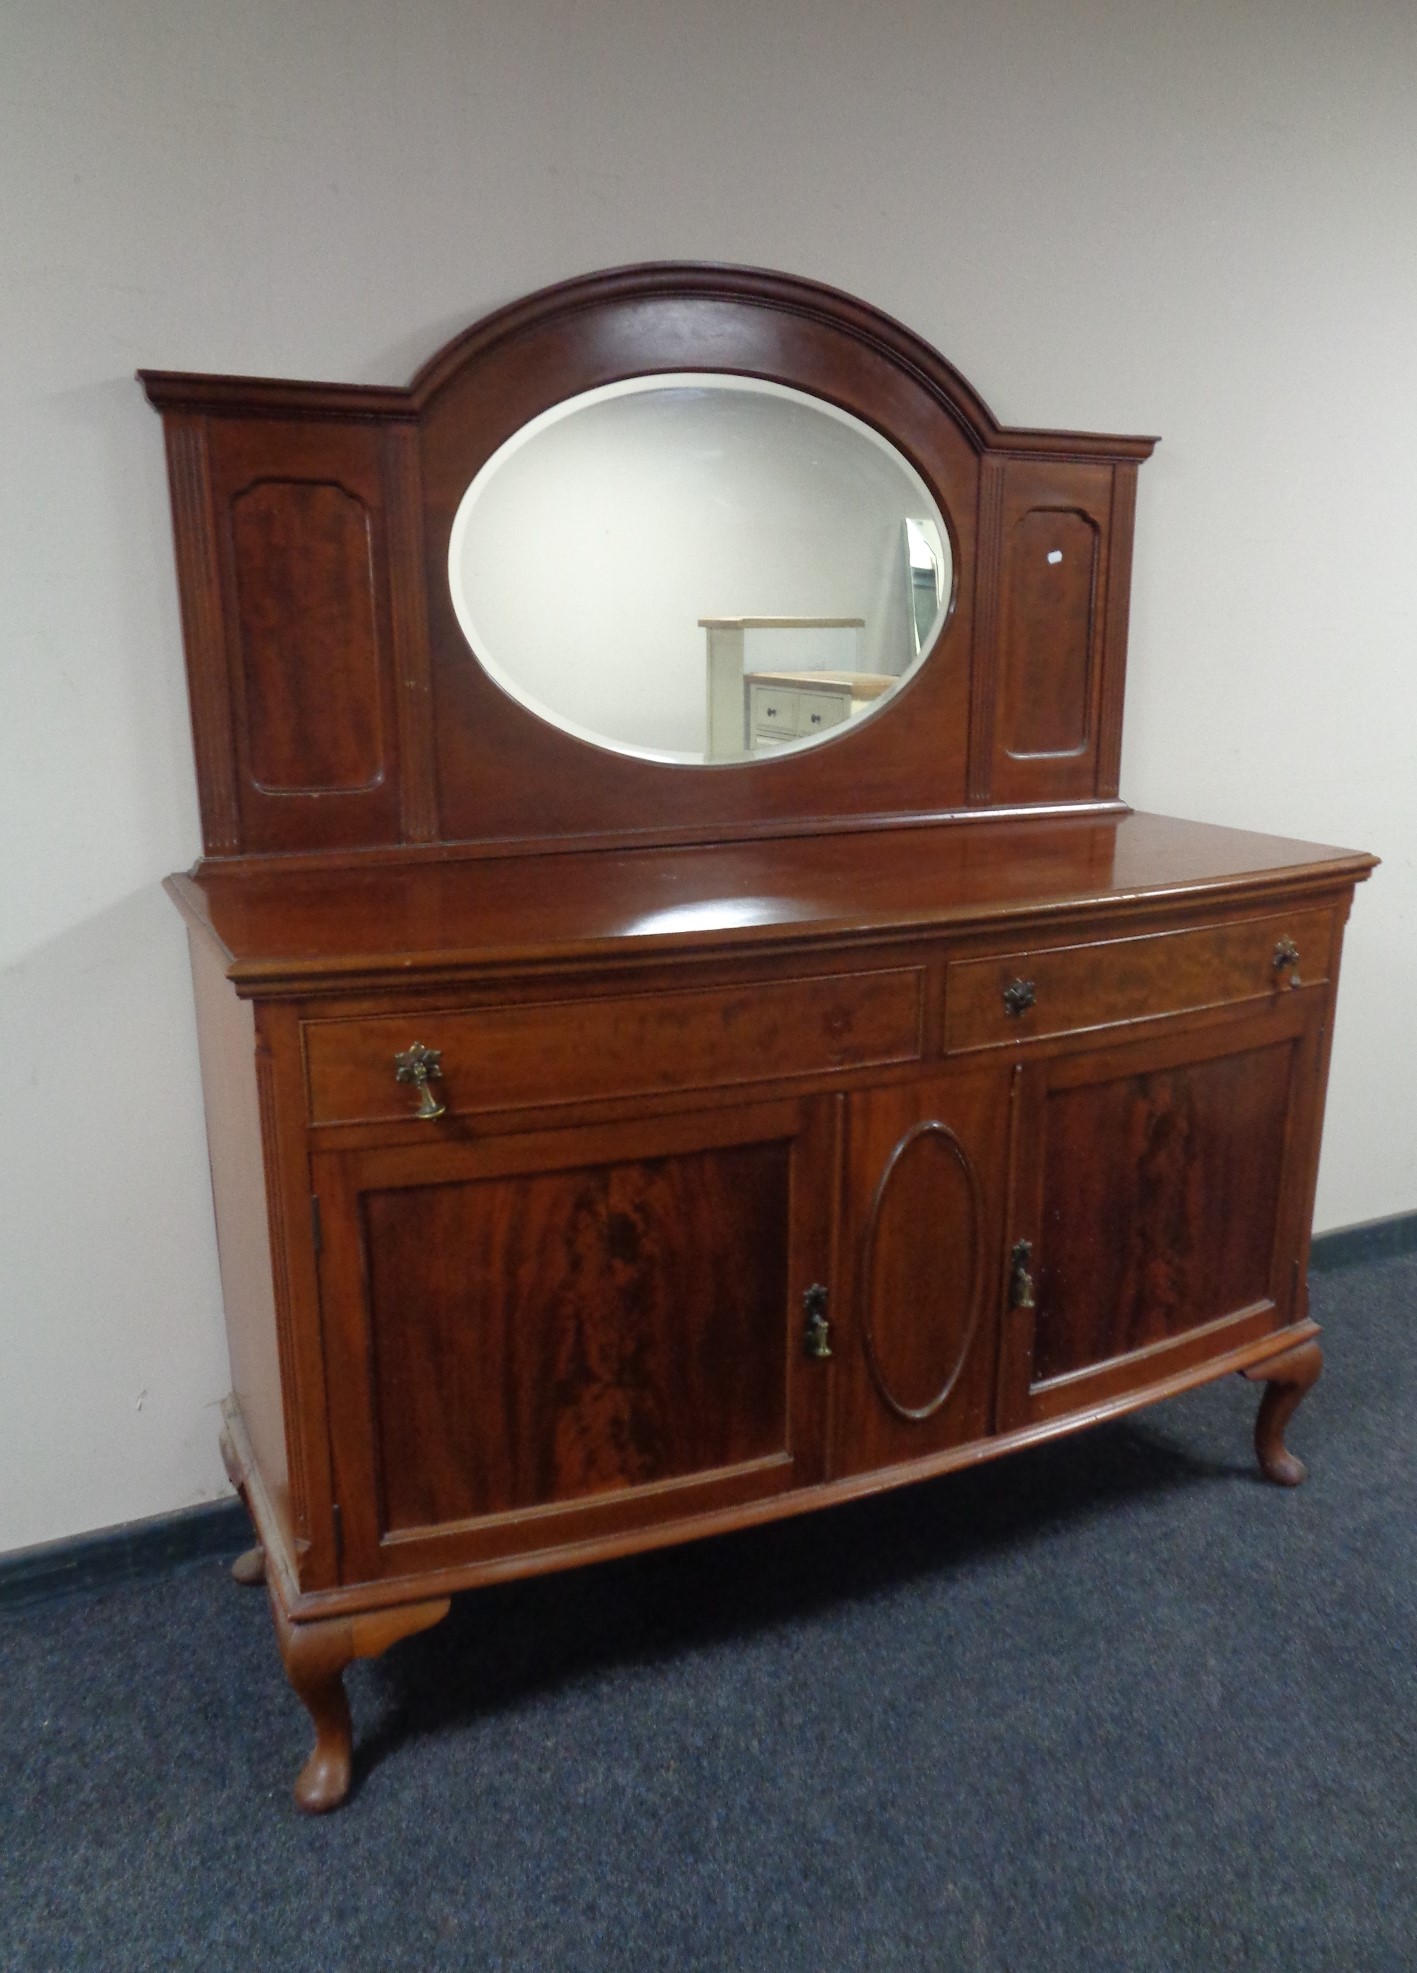 A mahogany bow fronted Queen Anne style mirror backed sideboard